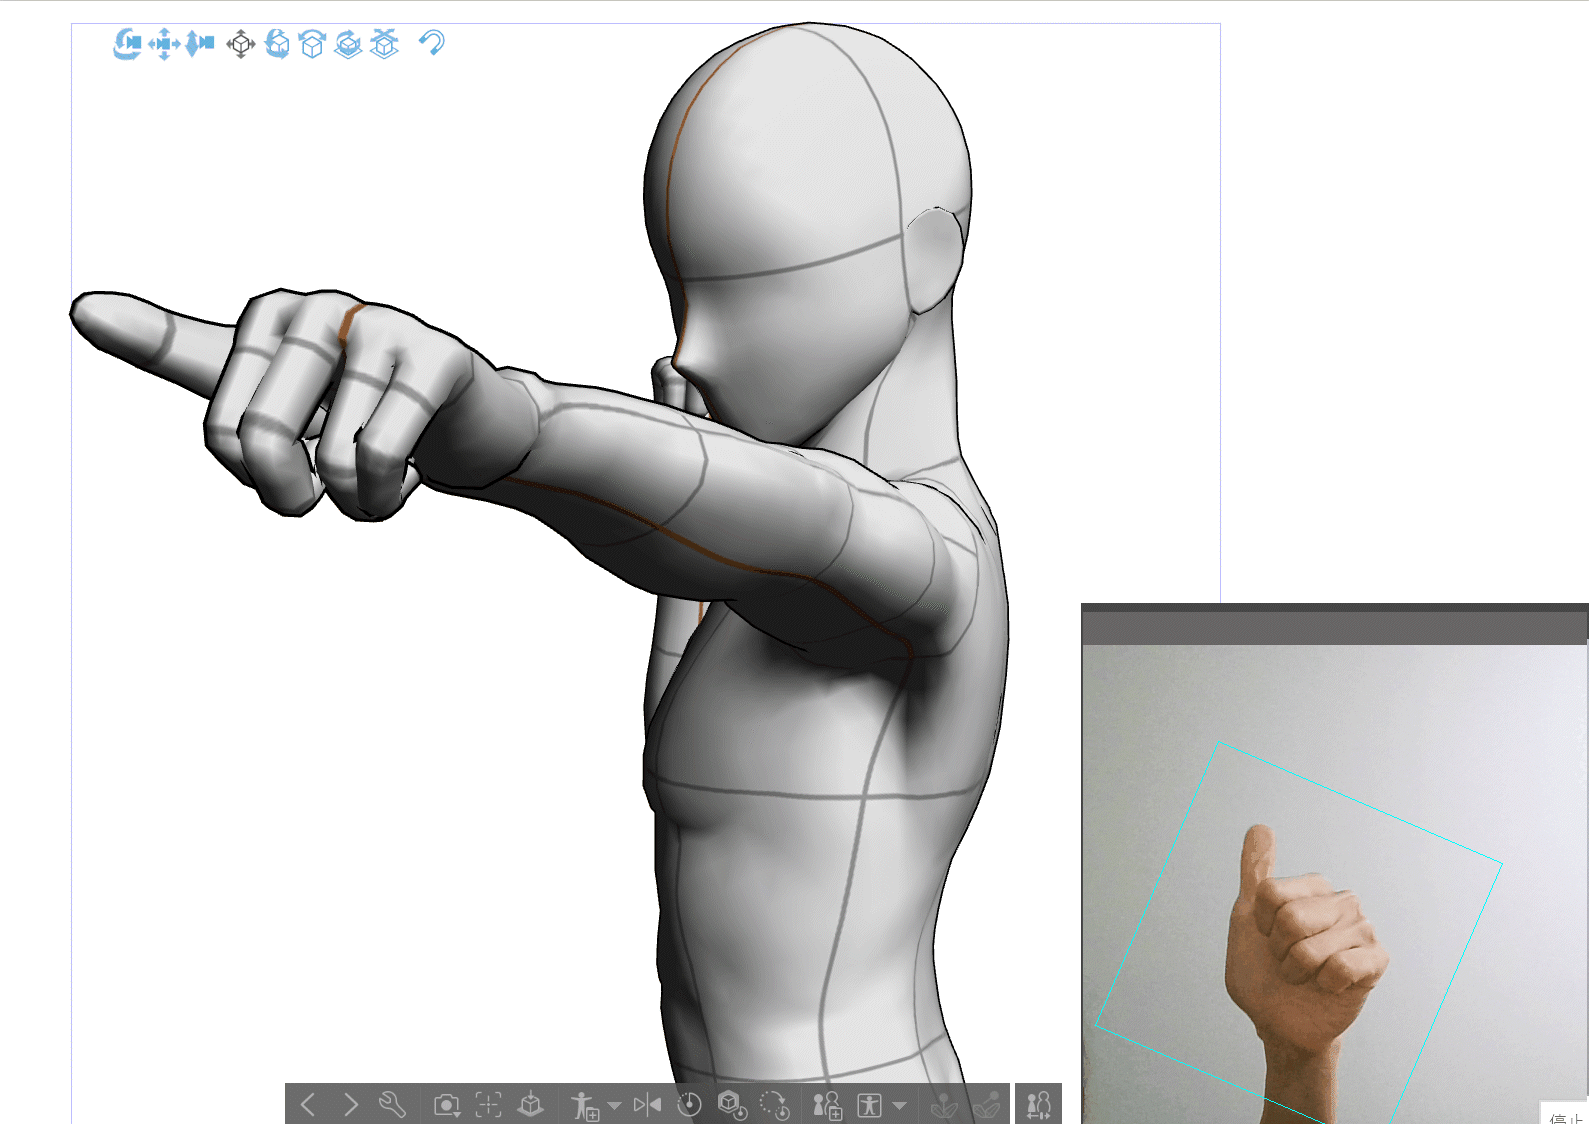 Transfer a 2D freehand sketch into the 3D body model through an... |  Download Scientific Diagram